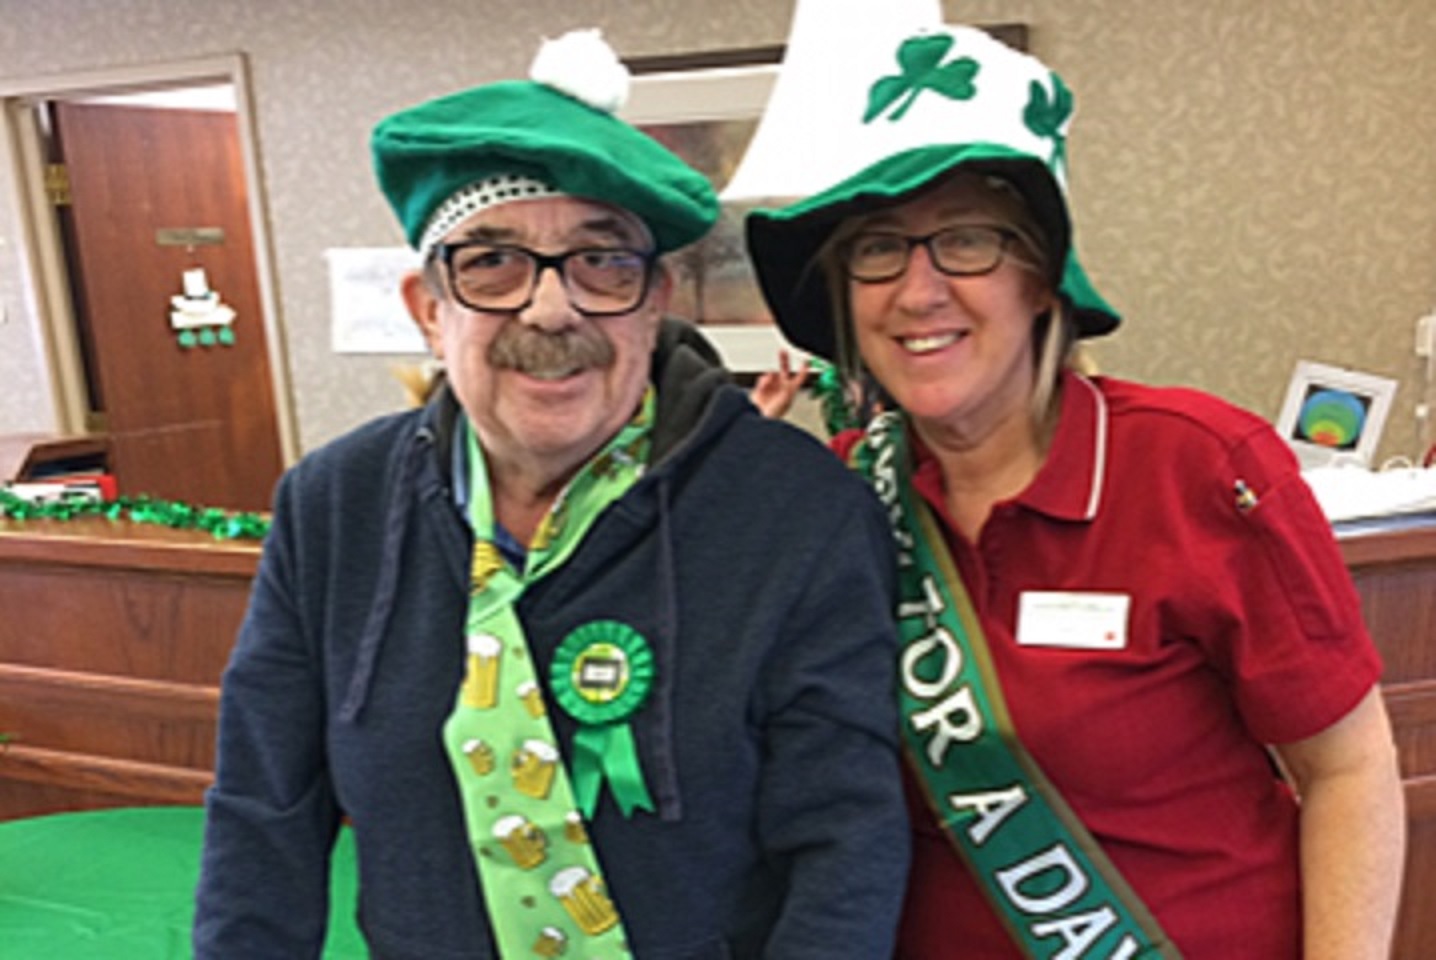 Doug and Kim celebrating St. Patrick's Day together. Kim says the CONNECT The Dots customer service training has helped the team at Riverside Glen support Doug even better